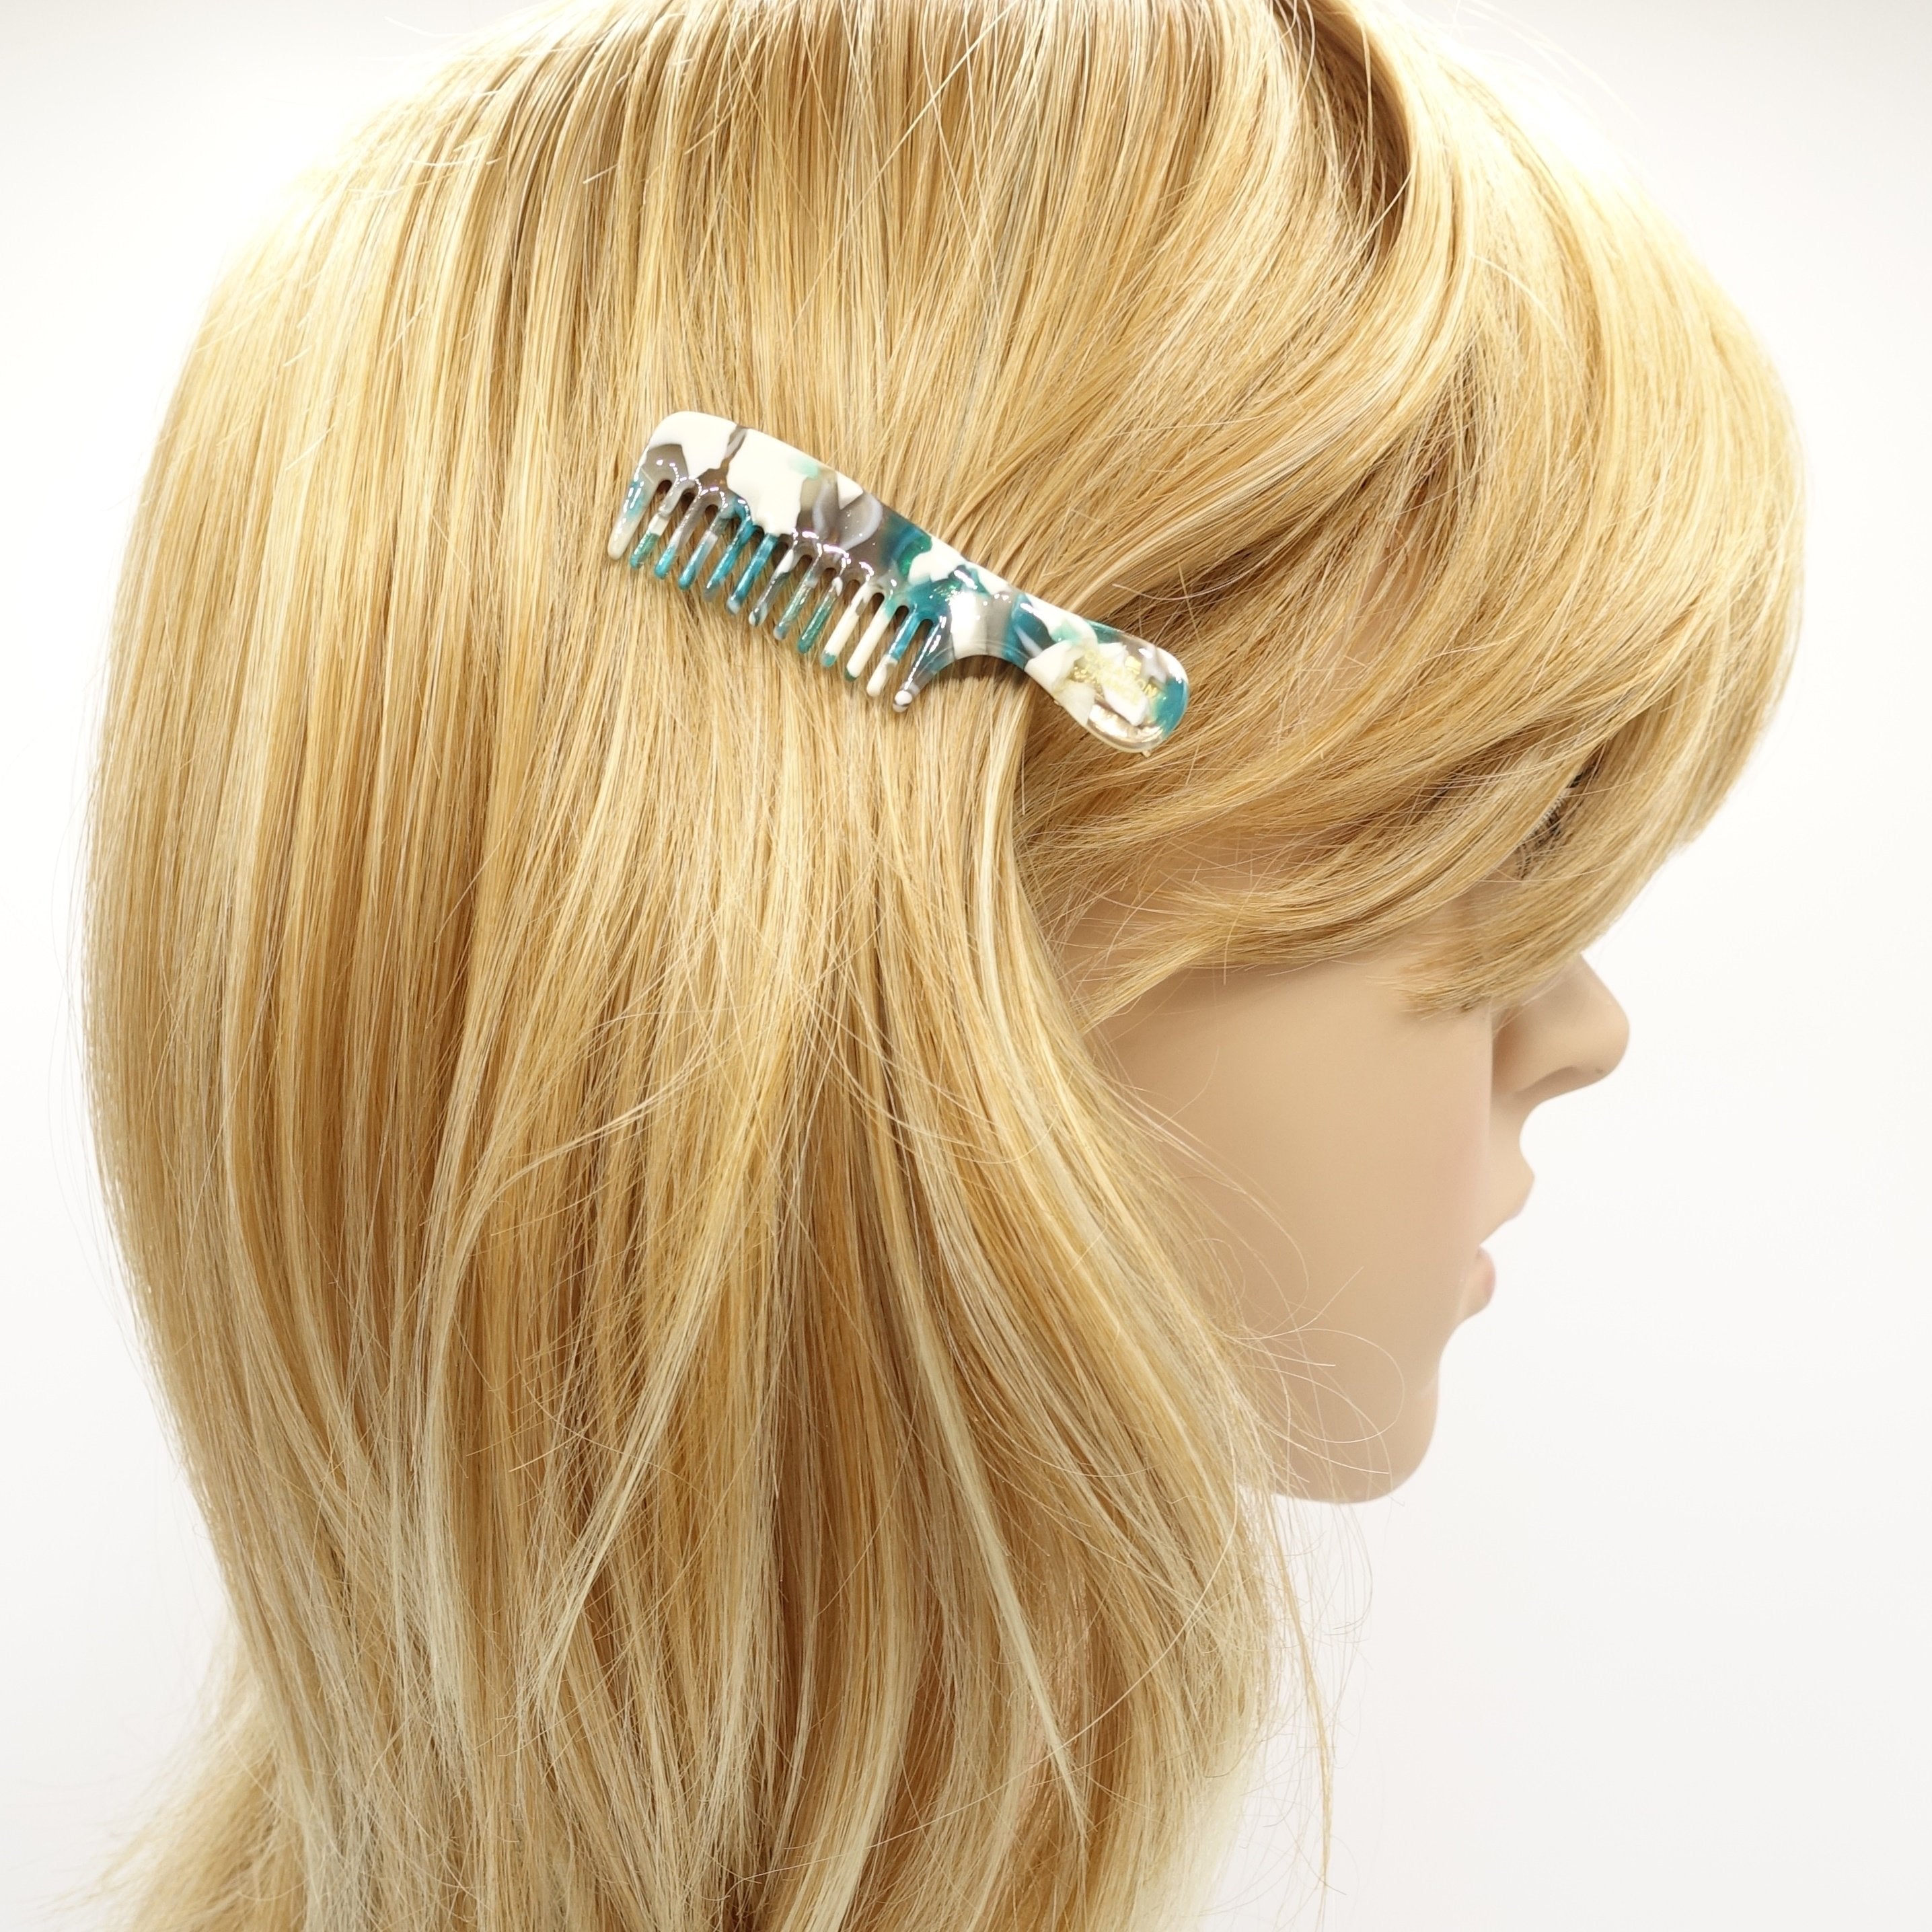 cellulose acetate comb hair clip hair accessory for women